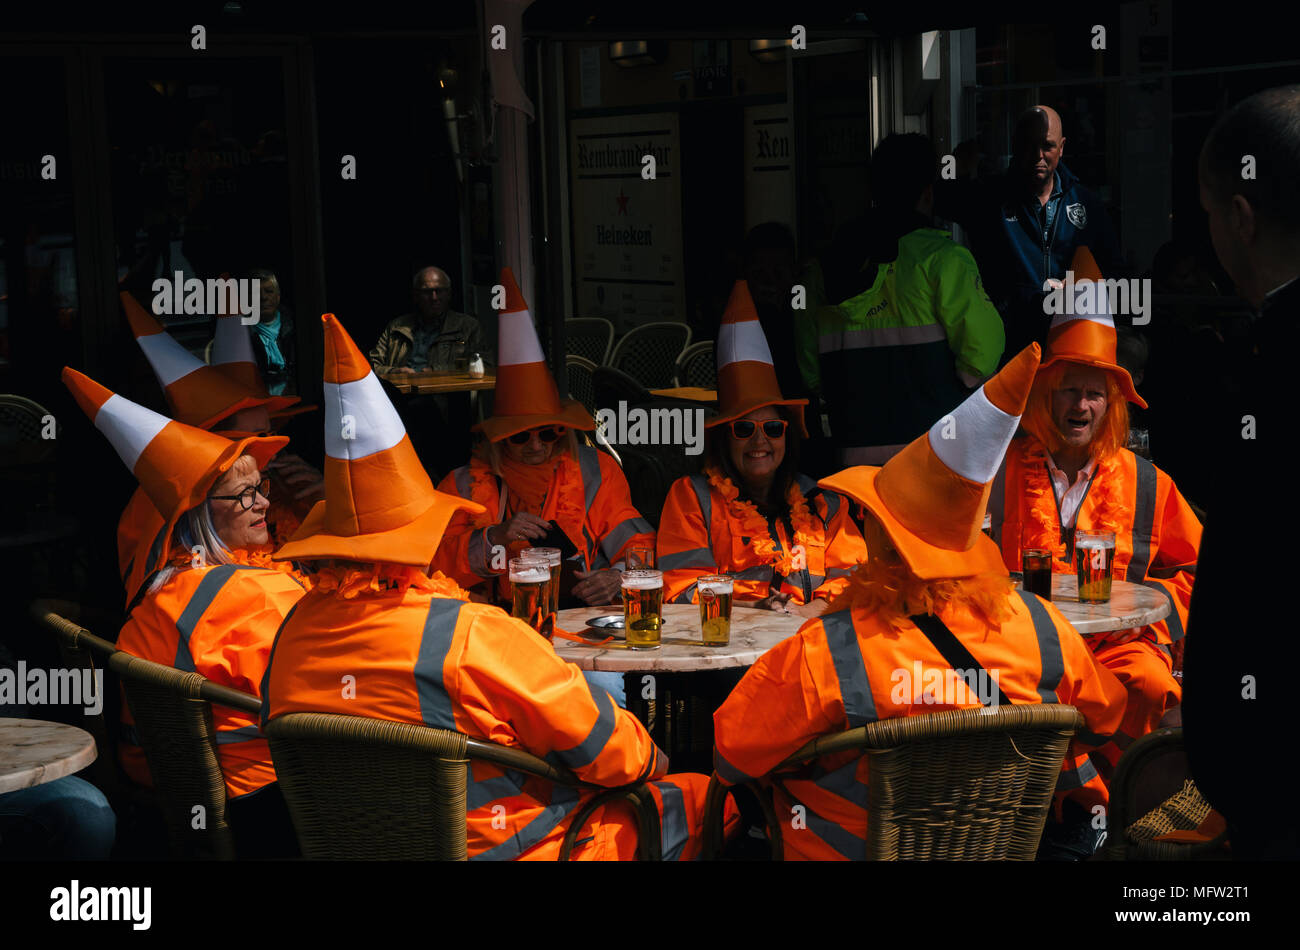 Amsterdam, Netherlands - 27 April, 2017: Group of people wearing orange costumes with hat like traffic cone on Day of the King in Amsterdam Stock Photo